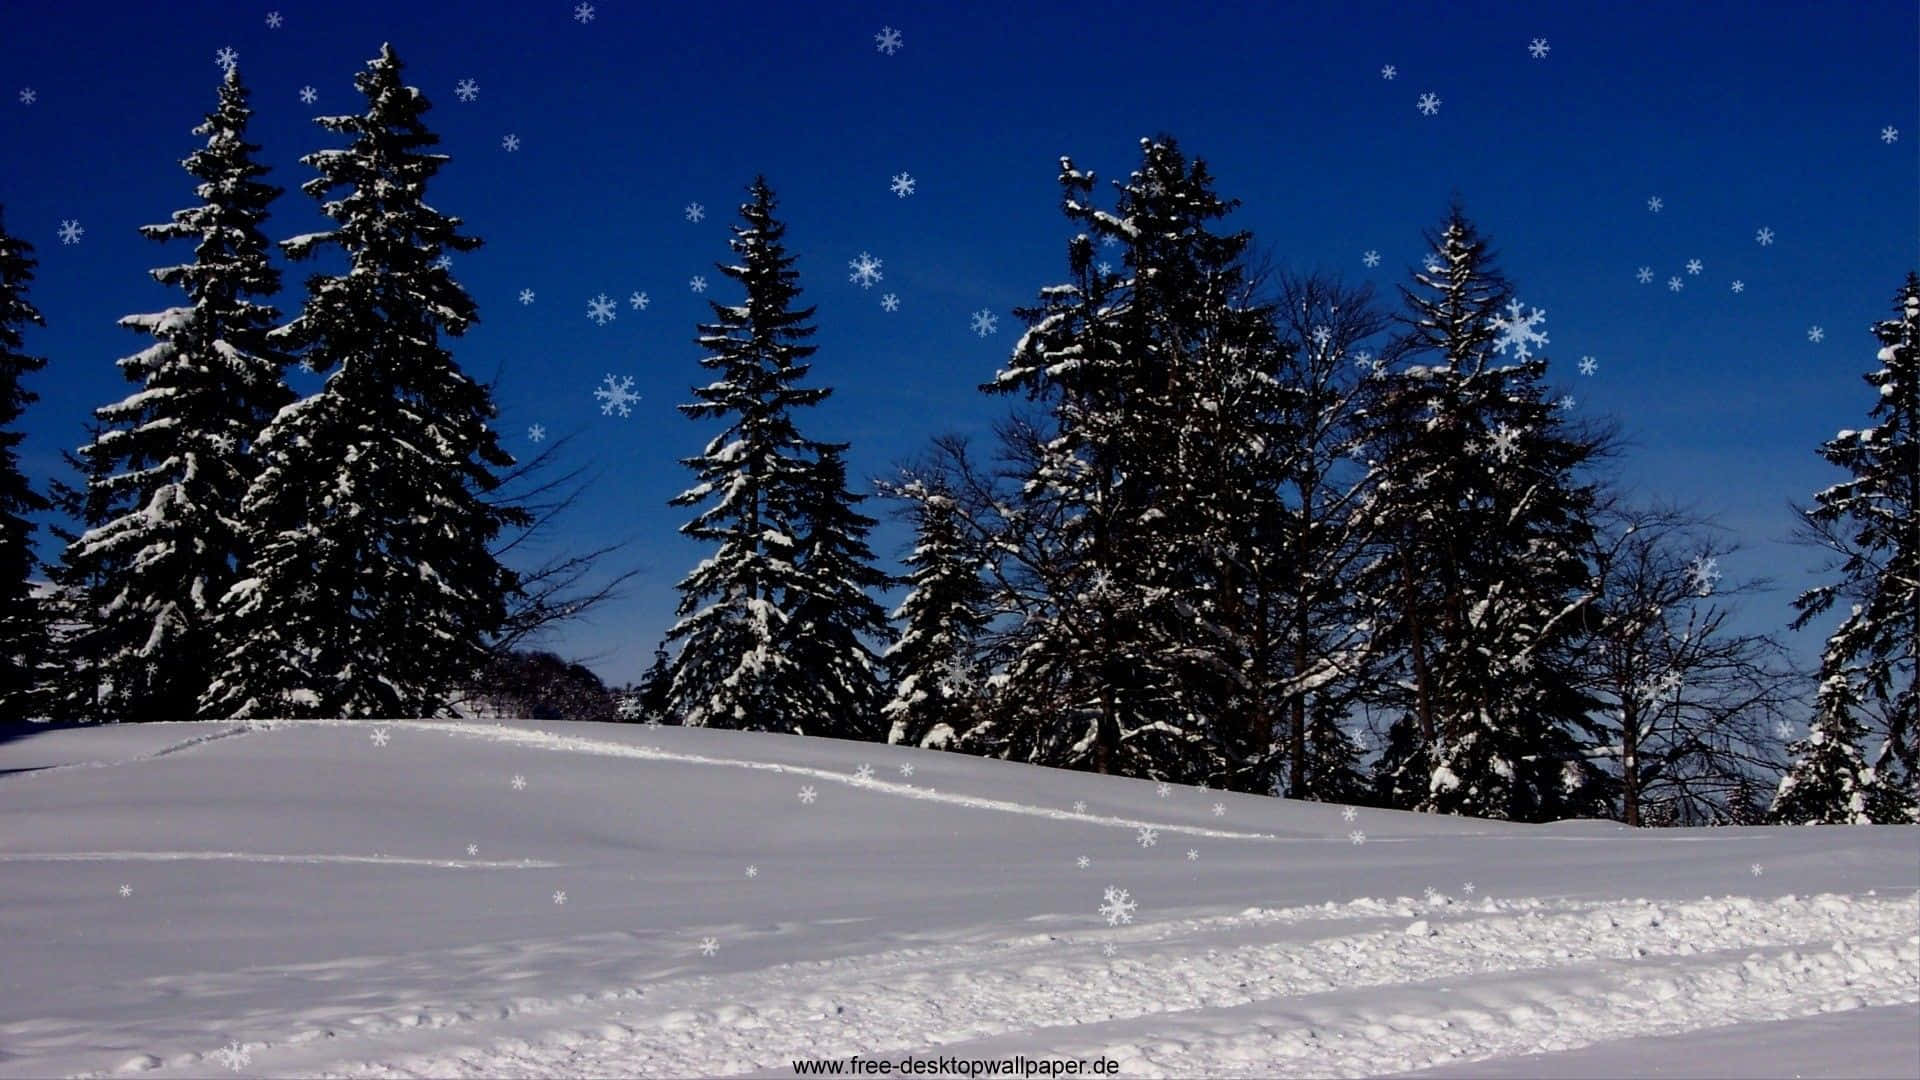 Enjoy the beauty of winter with this sparkling high resolution snow background